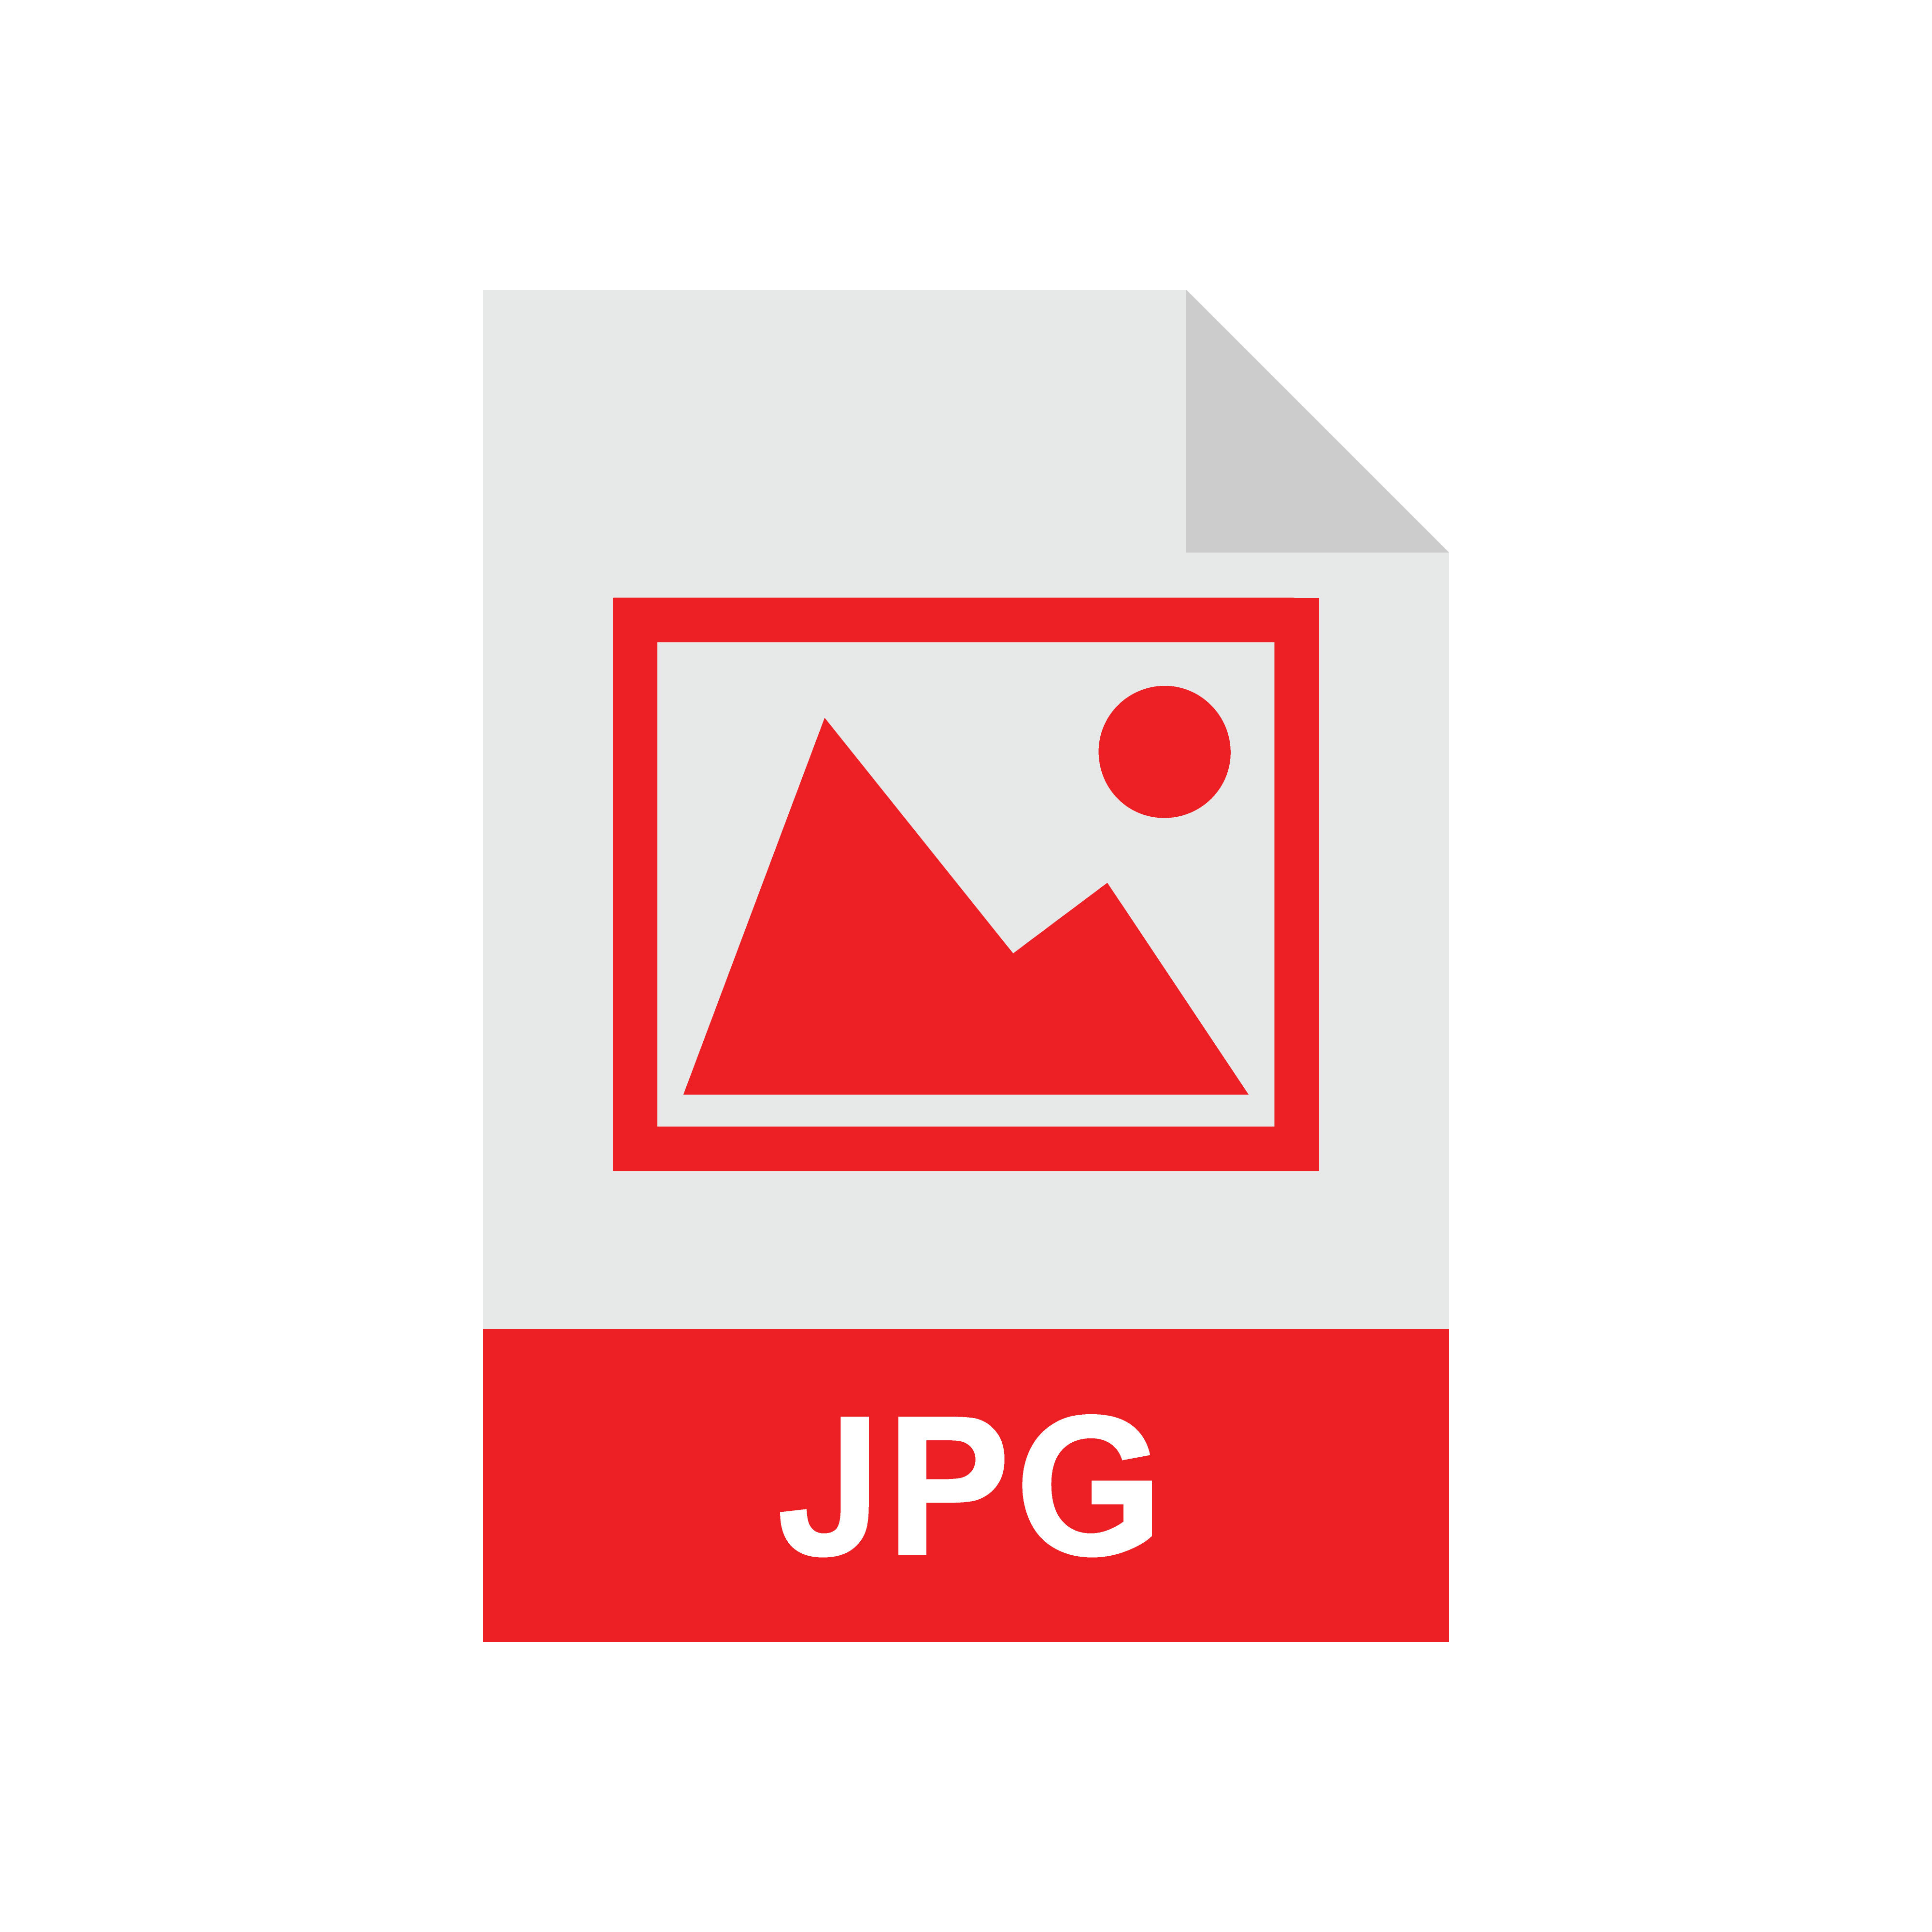 JPG format file vector icon. JPG format file Template for your design